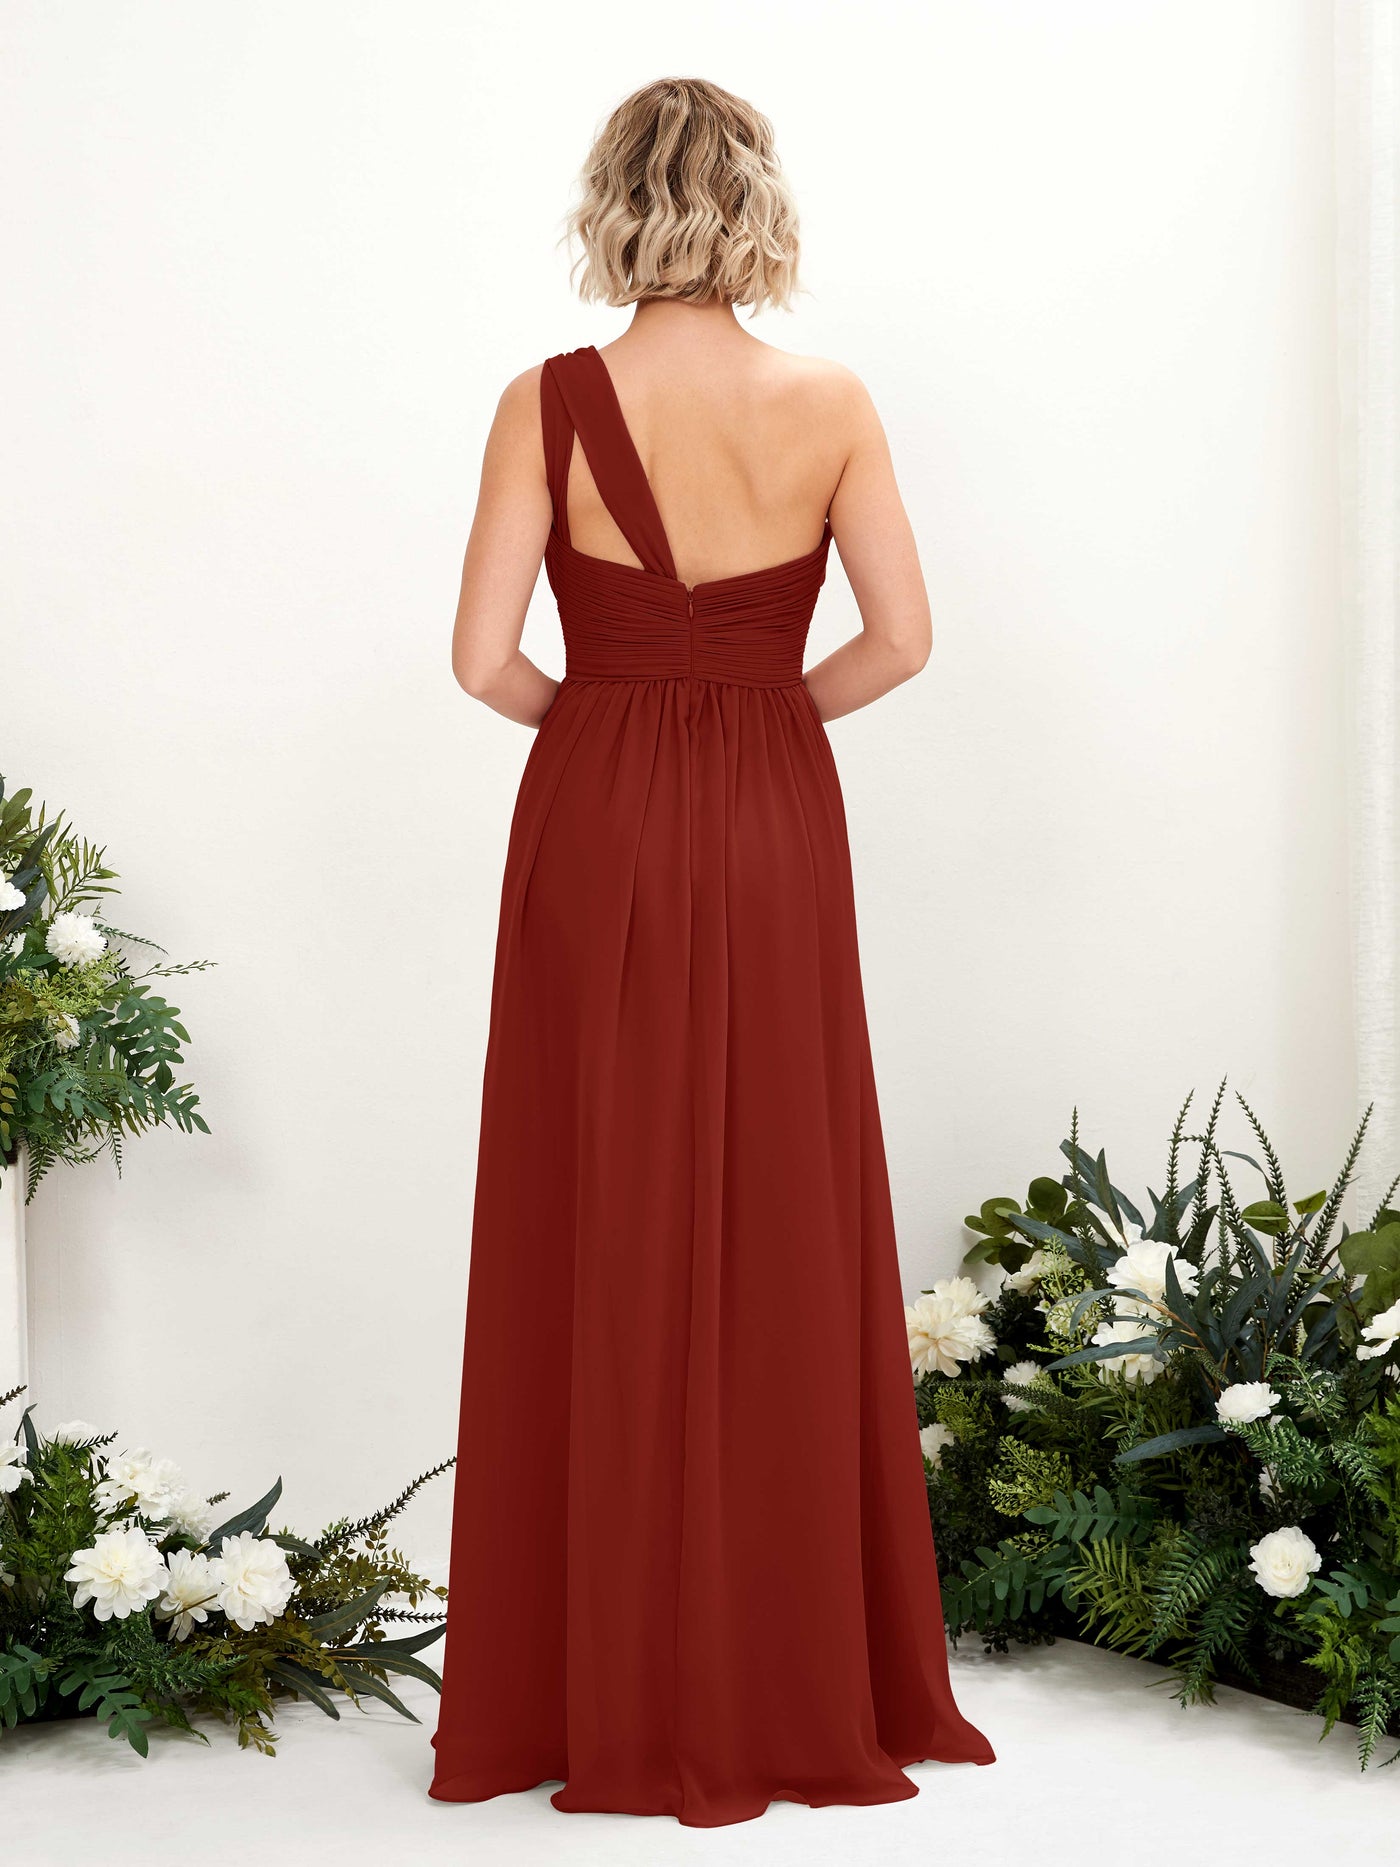 Rust Bridesmaid Dresses Bridesmaid Dress Ball Gown Chiffon One Shoulder Full Length Sleeveless Wedding Party Dress (81225019)#color_rust